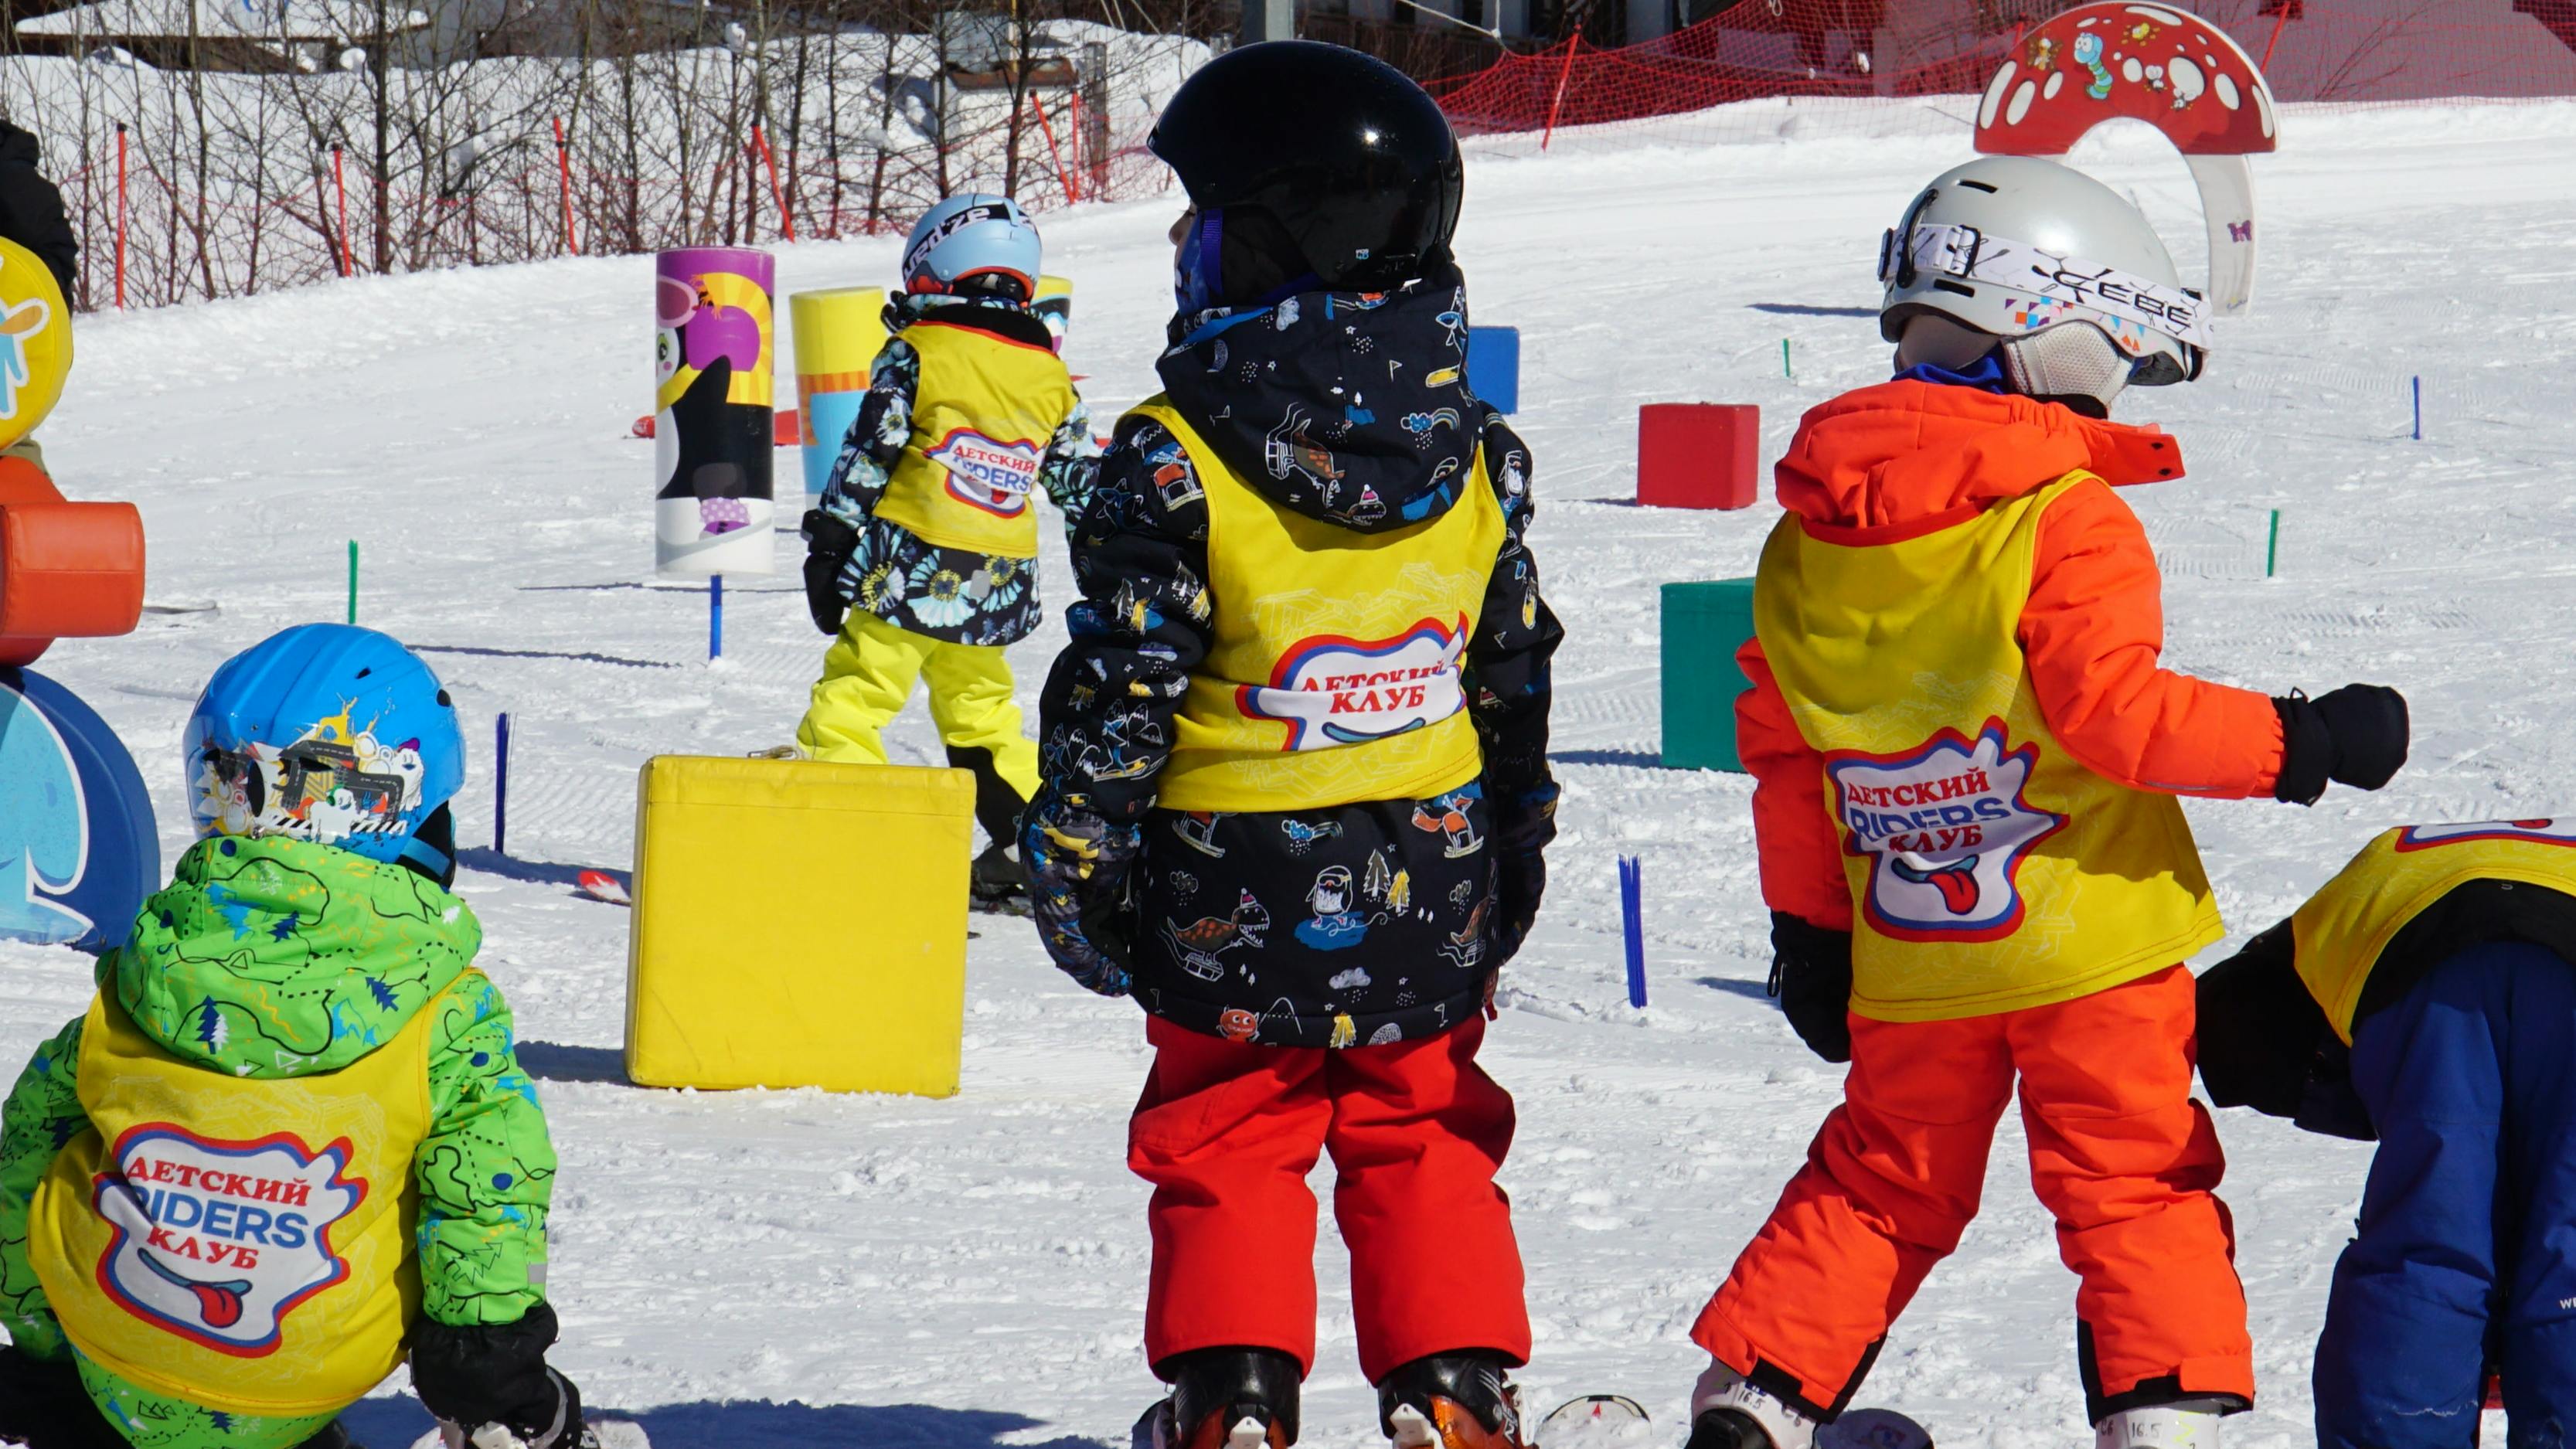 Several children are on snowboards in an obstacle course. They are all wearing the same shirt over their jacket and look like they are learning. There is an adult aged teacher standing in the background who looks like he is helping them learn how to snowboard. 